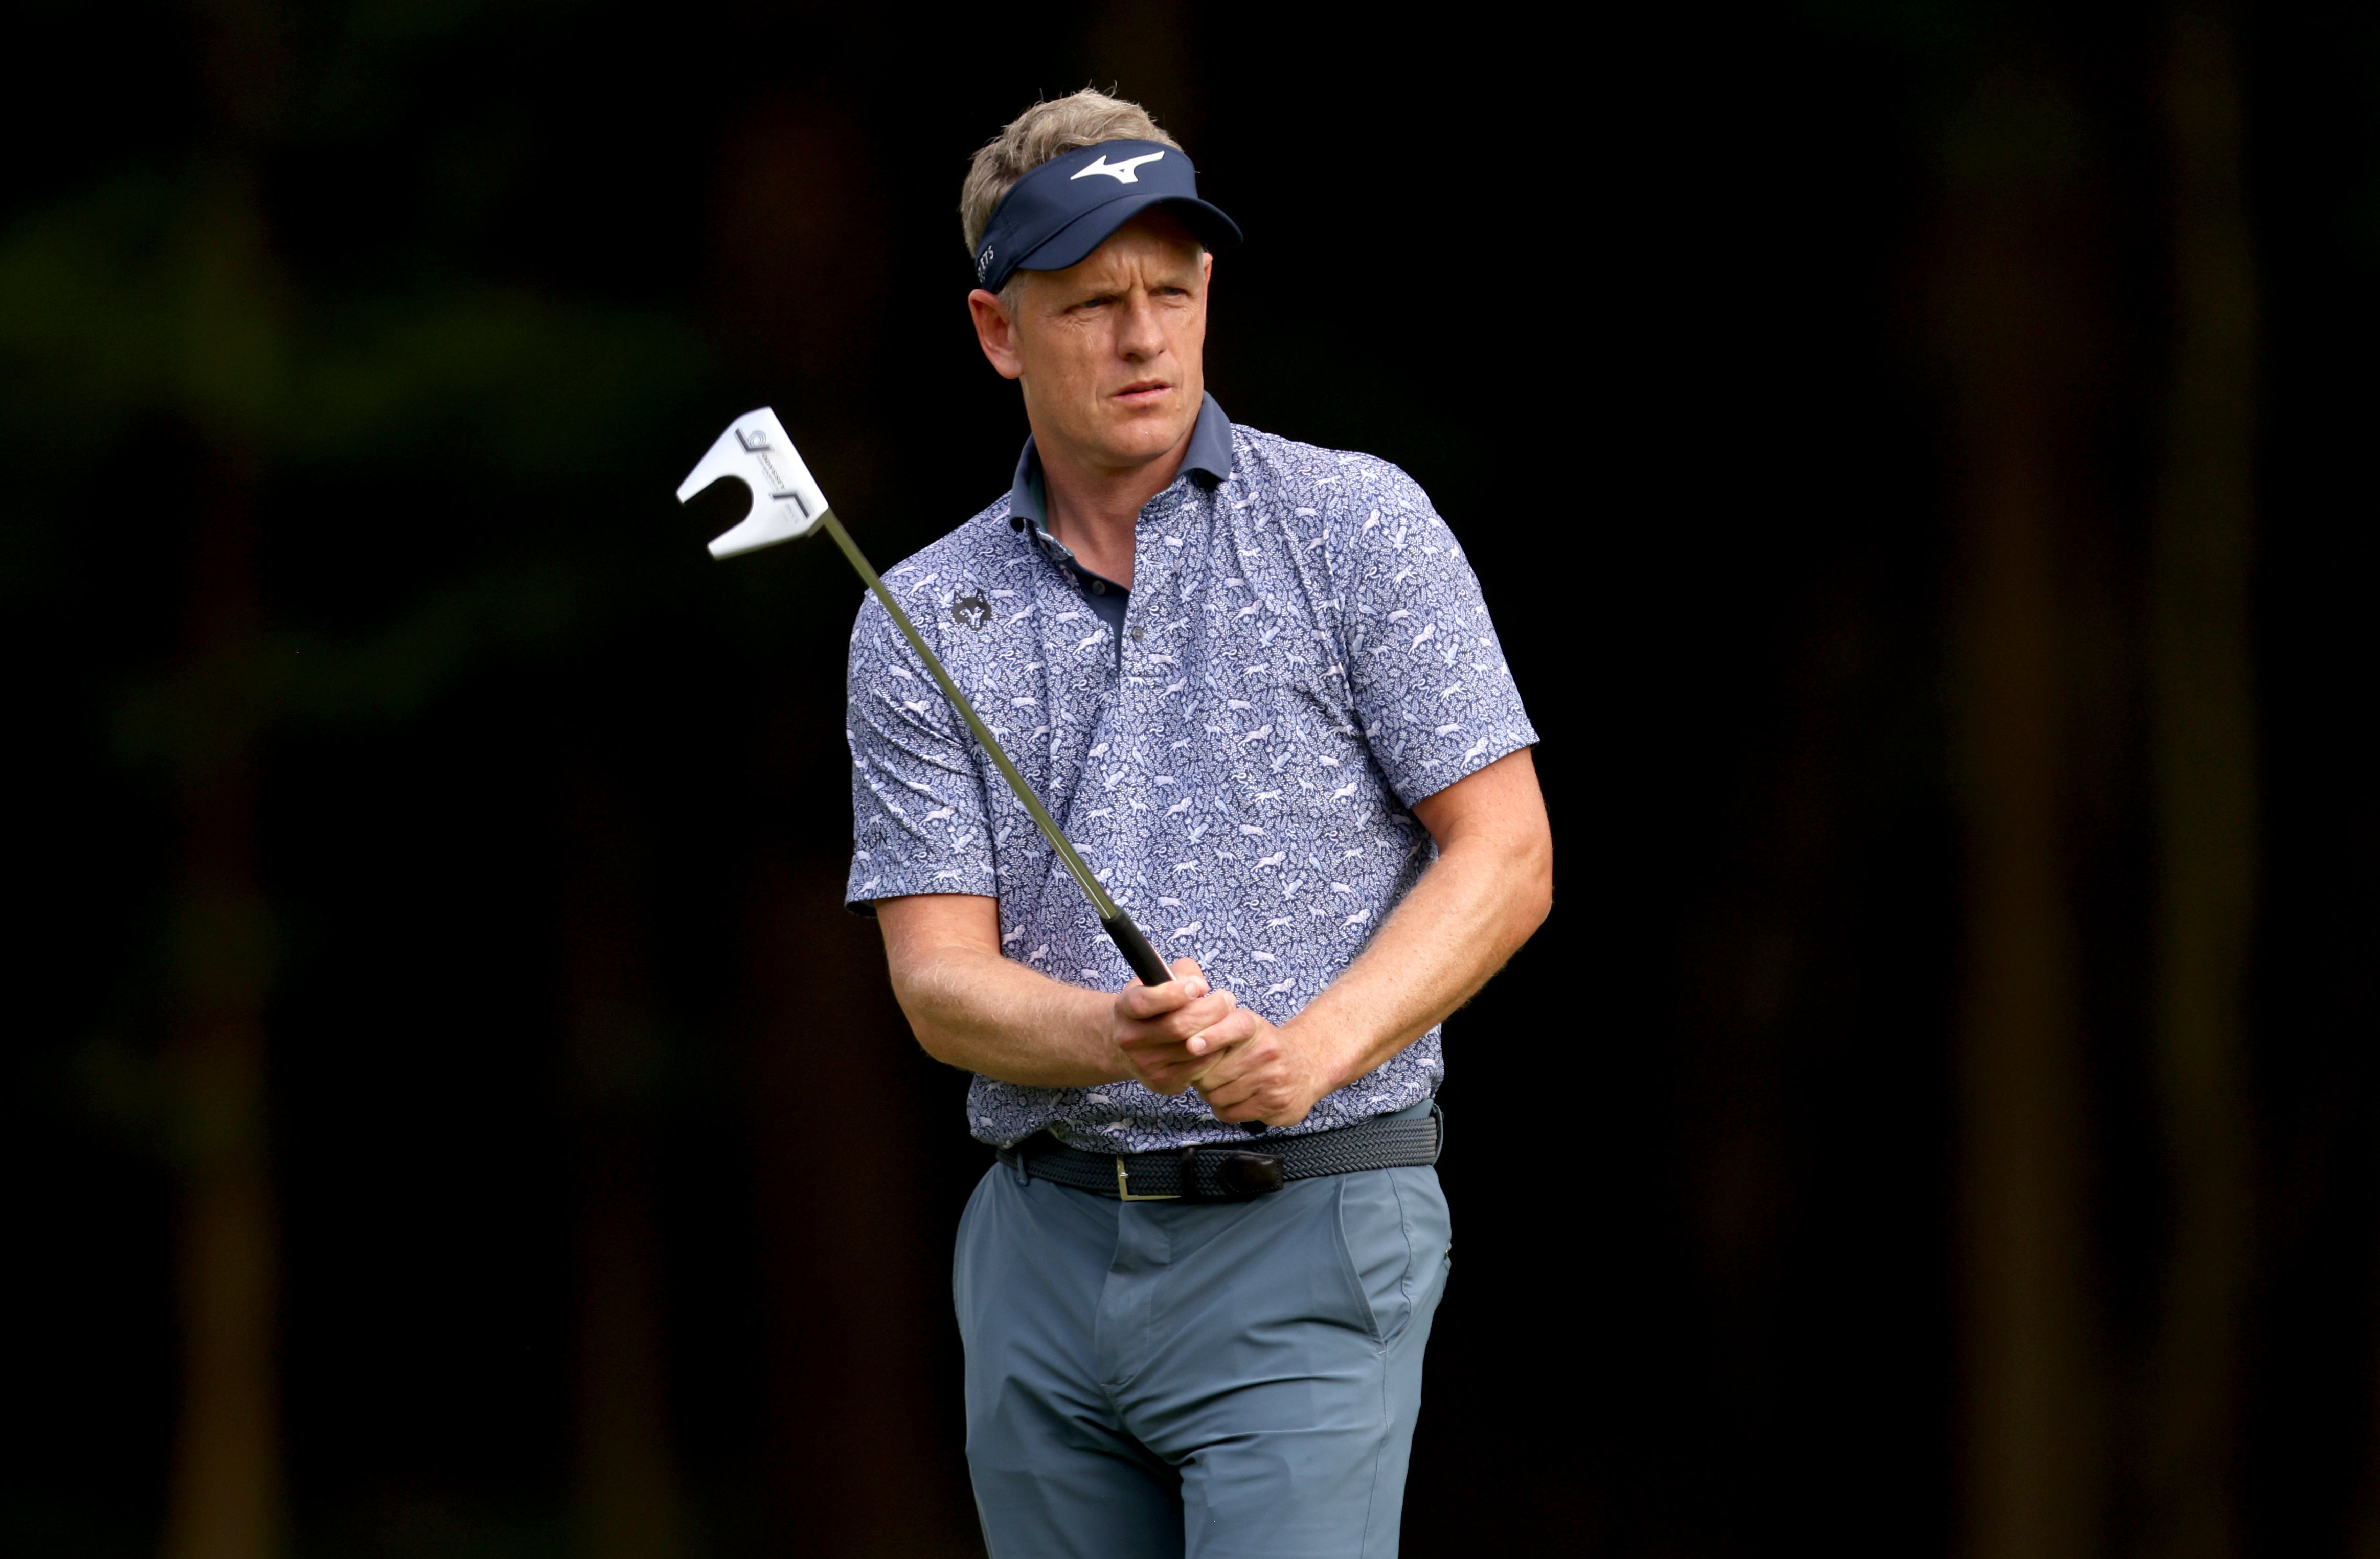 Europe Ryder Cup captain Luke Donald will oversee the Hero Cup in Abu Dhabi in January which he hopes will give match play experience to future Ryder Cup players (Steve Paston/PA Images).